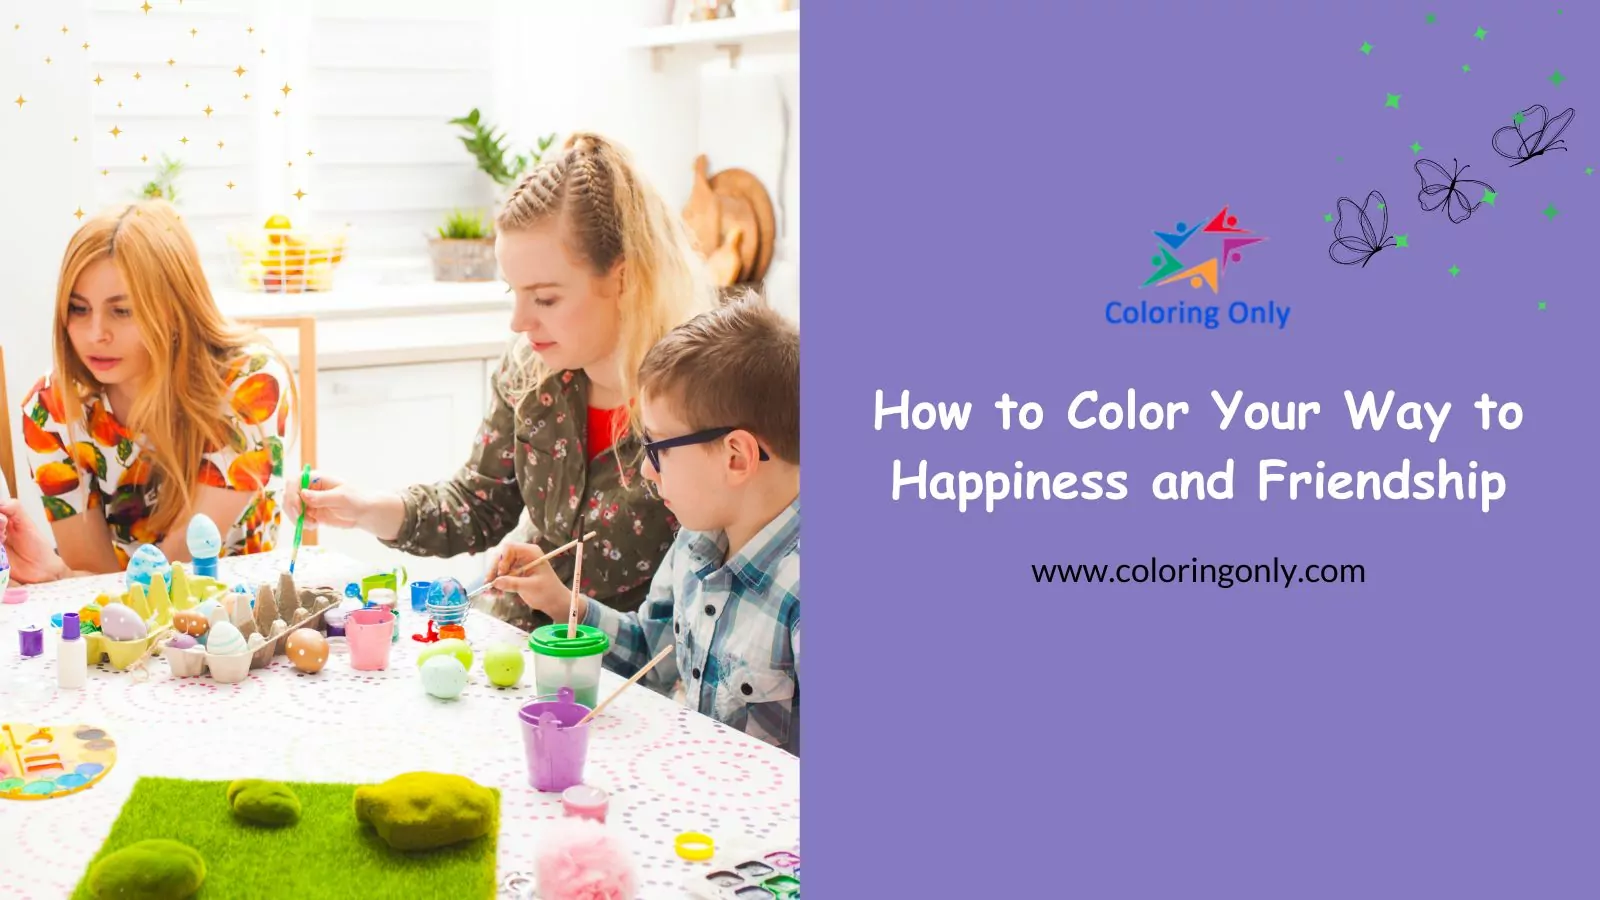 How to Color Your Way to Happiness and Friendship